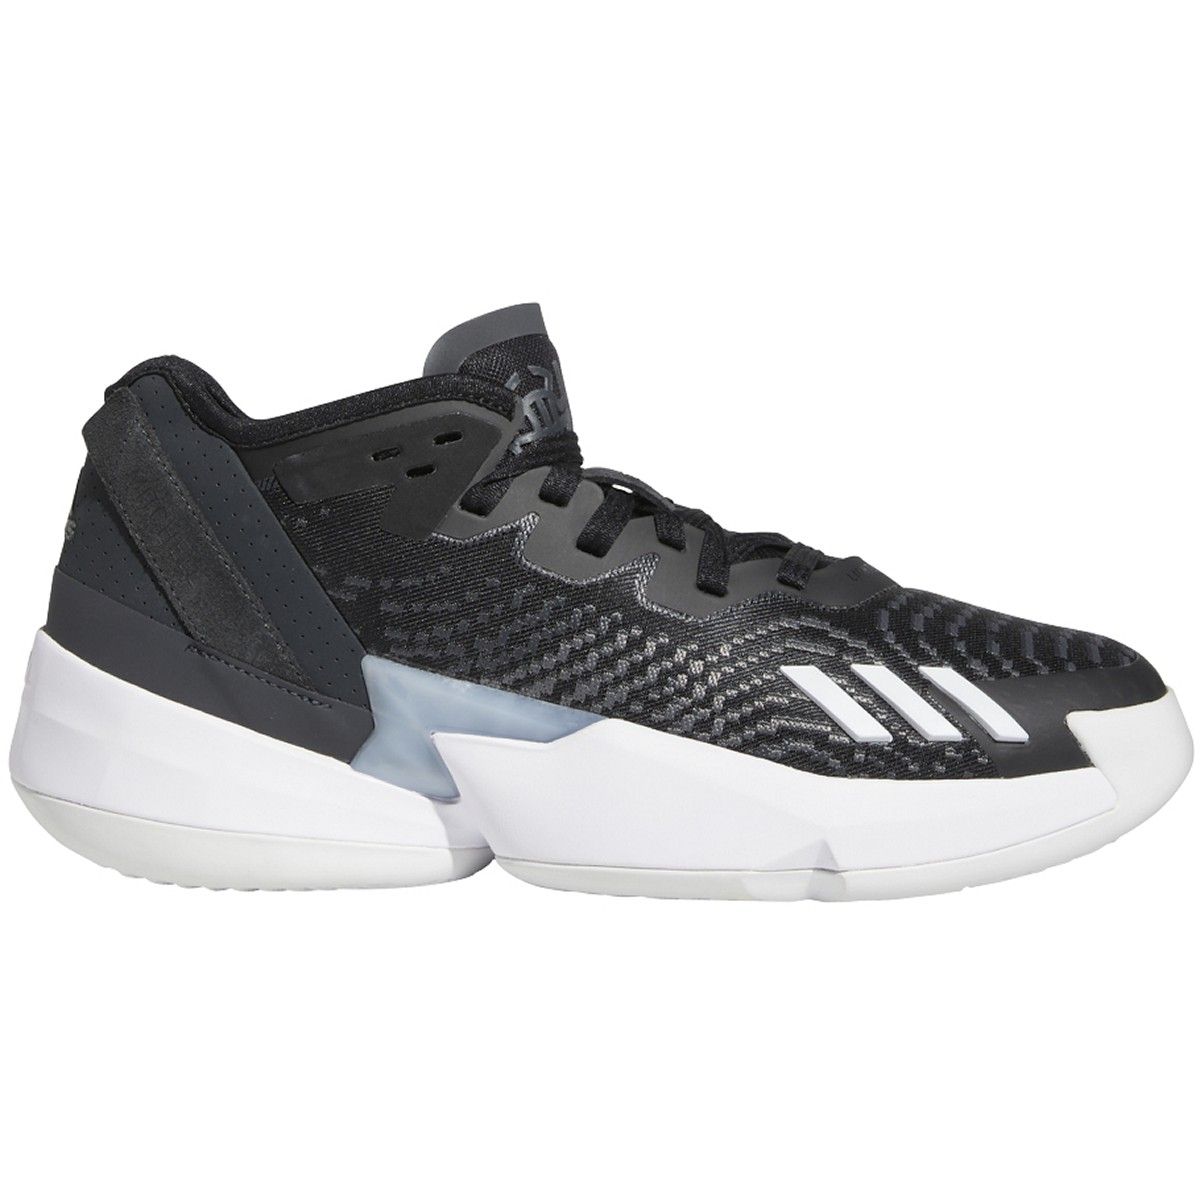 Adidas Unisex D.O.N. Issue 4 Basketball Shoes, Black/White/Carbon / 10.5